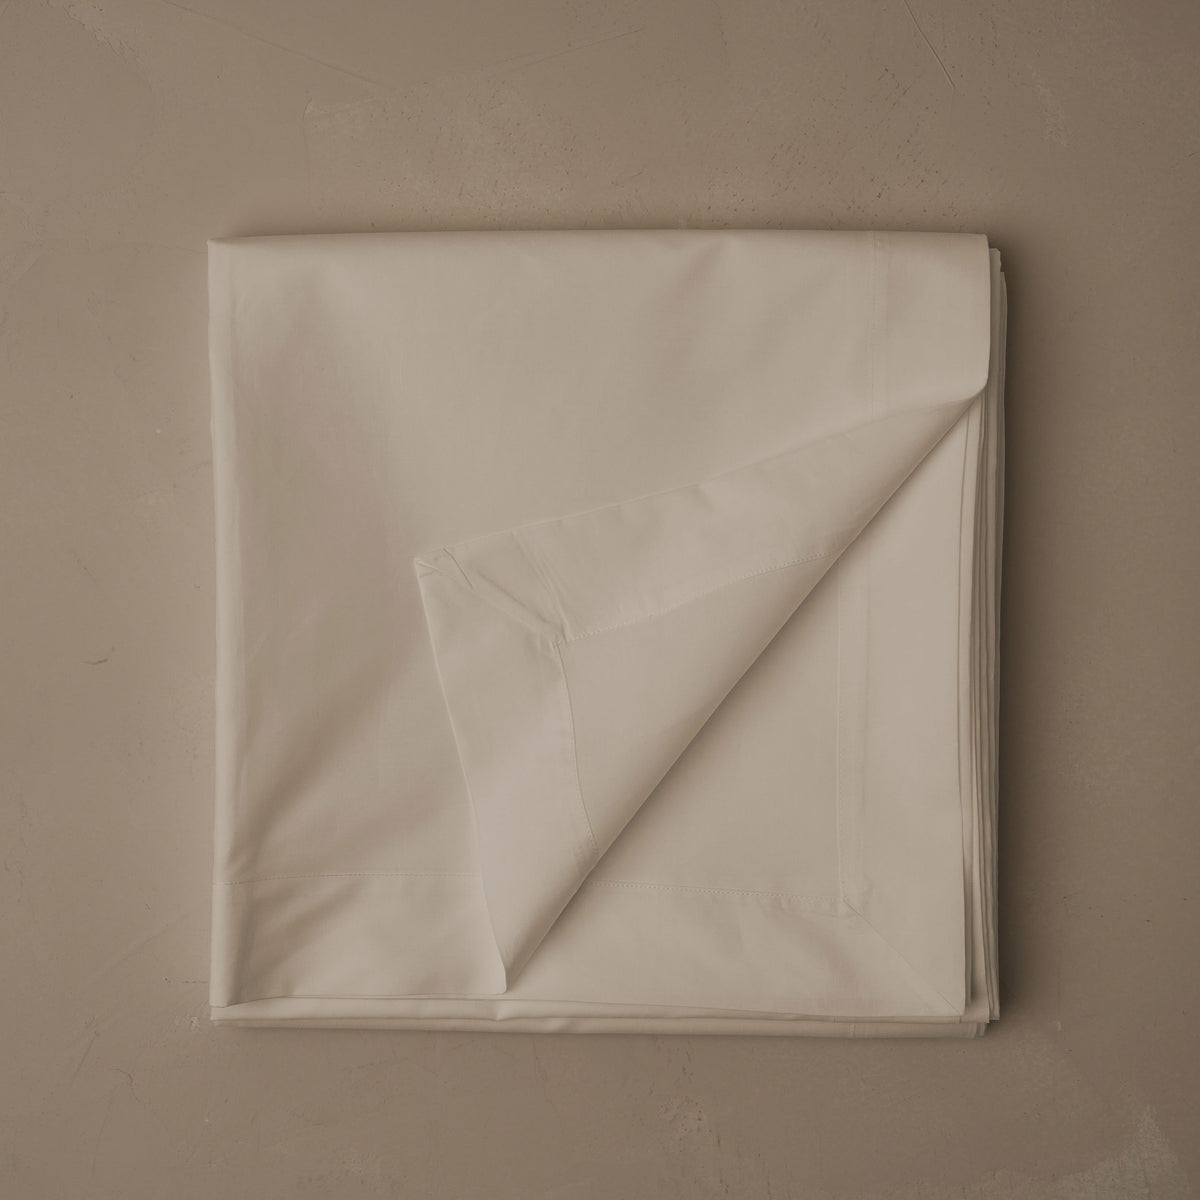 Cool and crisp LETTO Giza Reserve Cotton Percale flat sheet in color ivory, made in Italy. data-image-id=